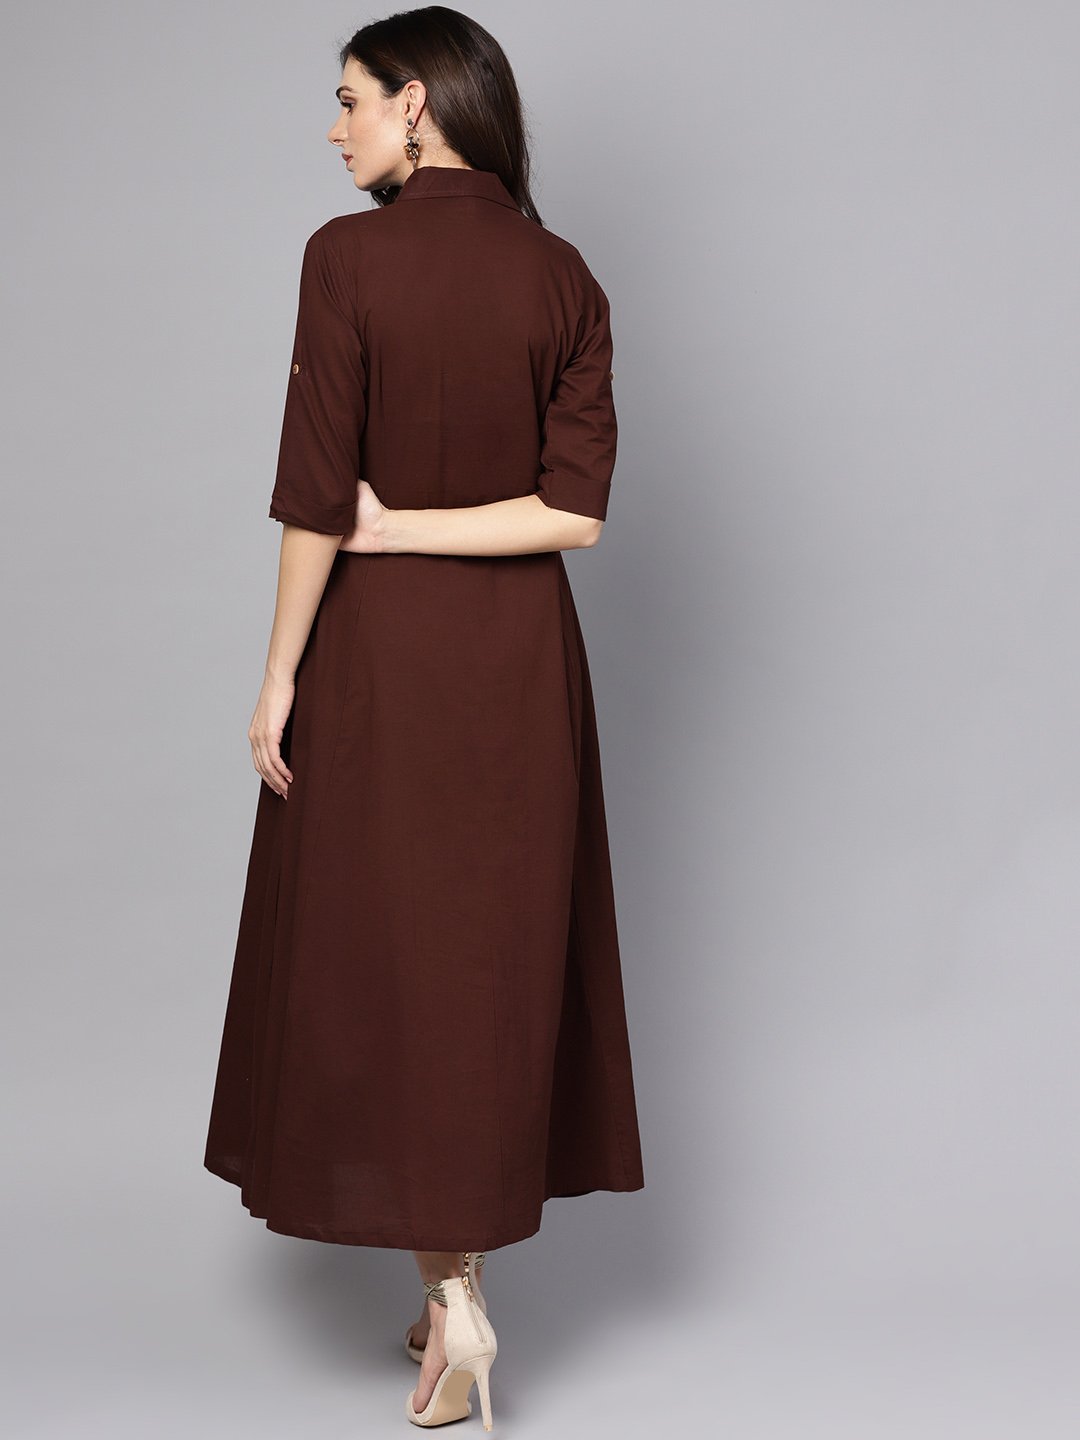 Women's Solid Chocolate Brown Maxi Dress With Shirt Collar & 3/4 Sleeves - Nayo Clothing